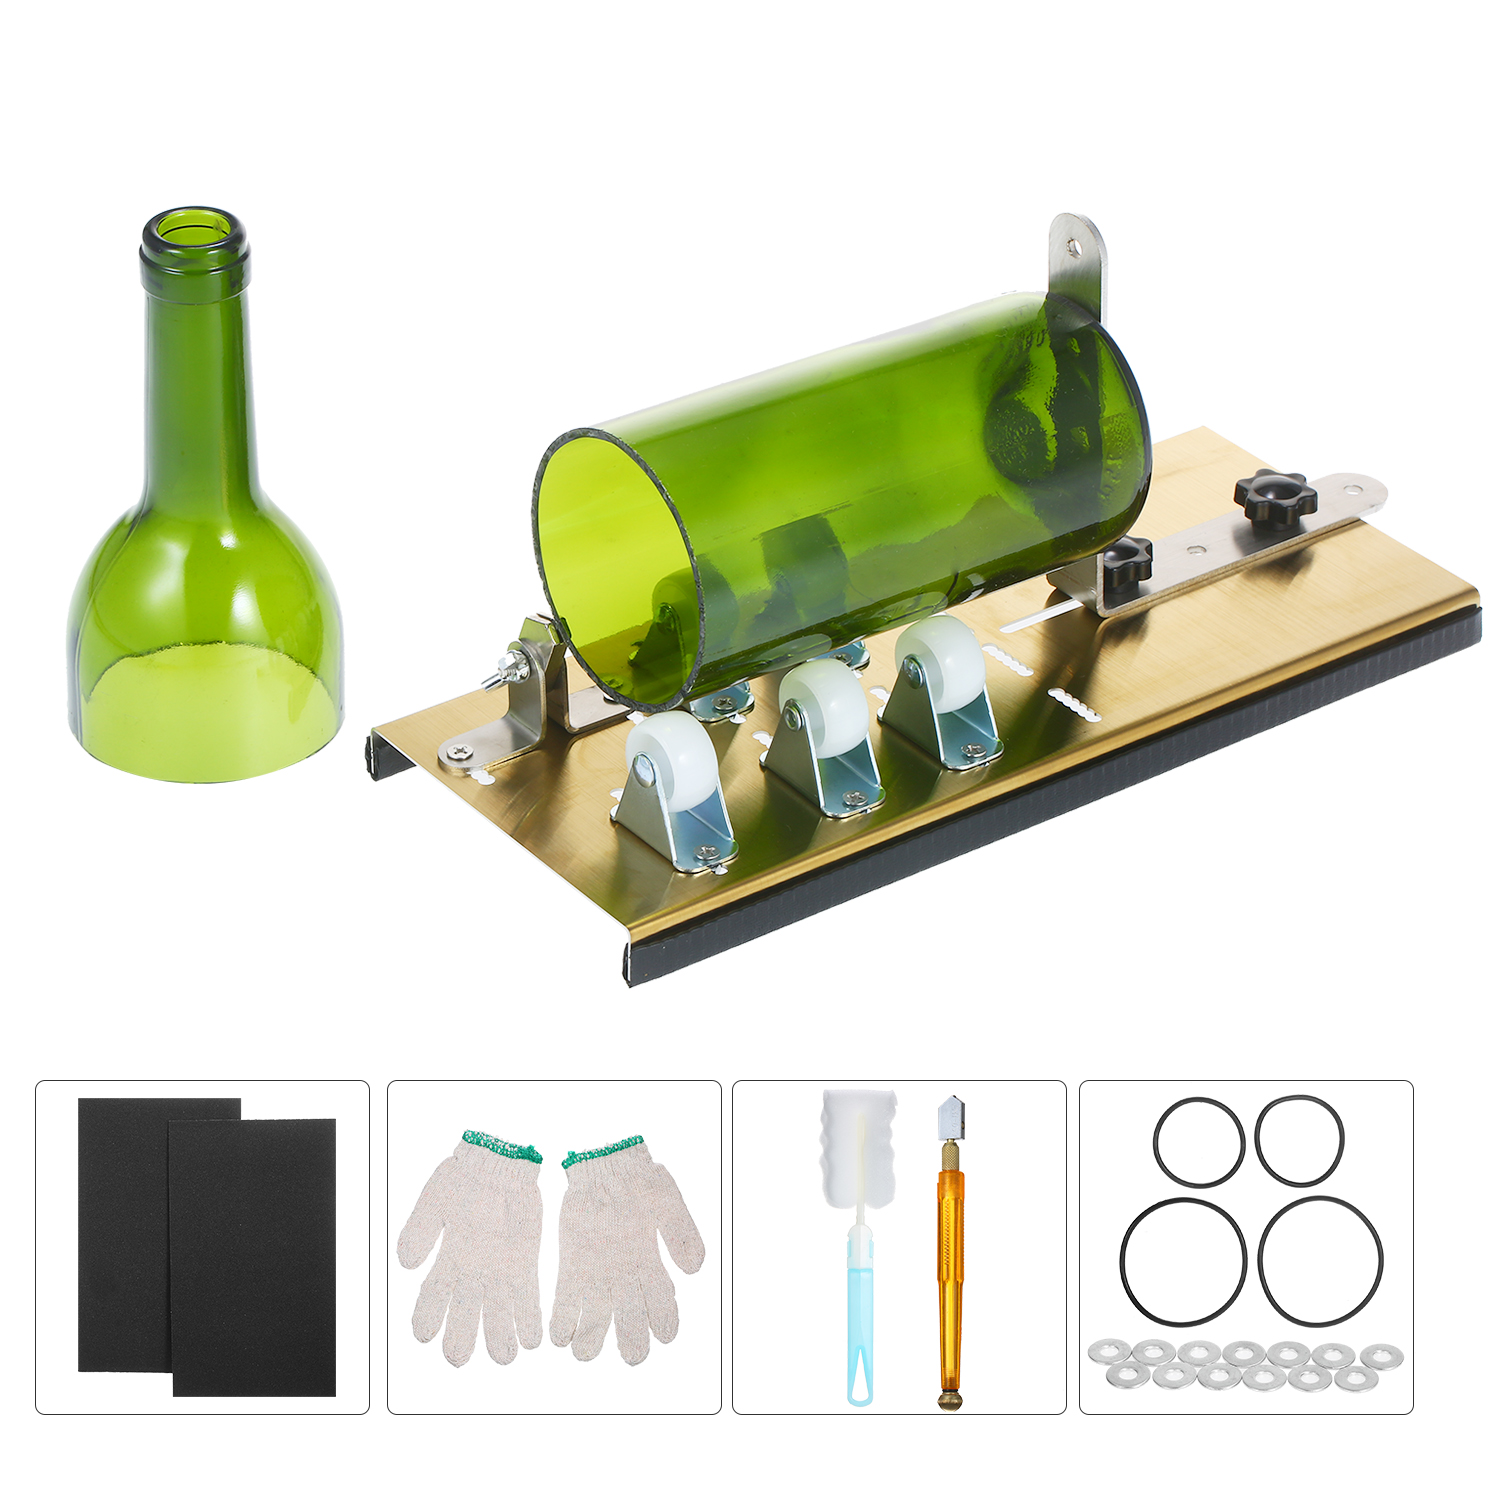 Carevas Glass Bottle Cutter Kit Bottle Cutter DIY Machine for Cutting Round Oval Bottles and Mason Jars with Gloves Sanding Paper Fixing Rubber Ring and Pencil Glass Cutter for Bottle DIY Art - image 1 of 7